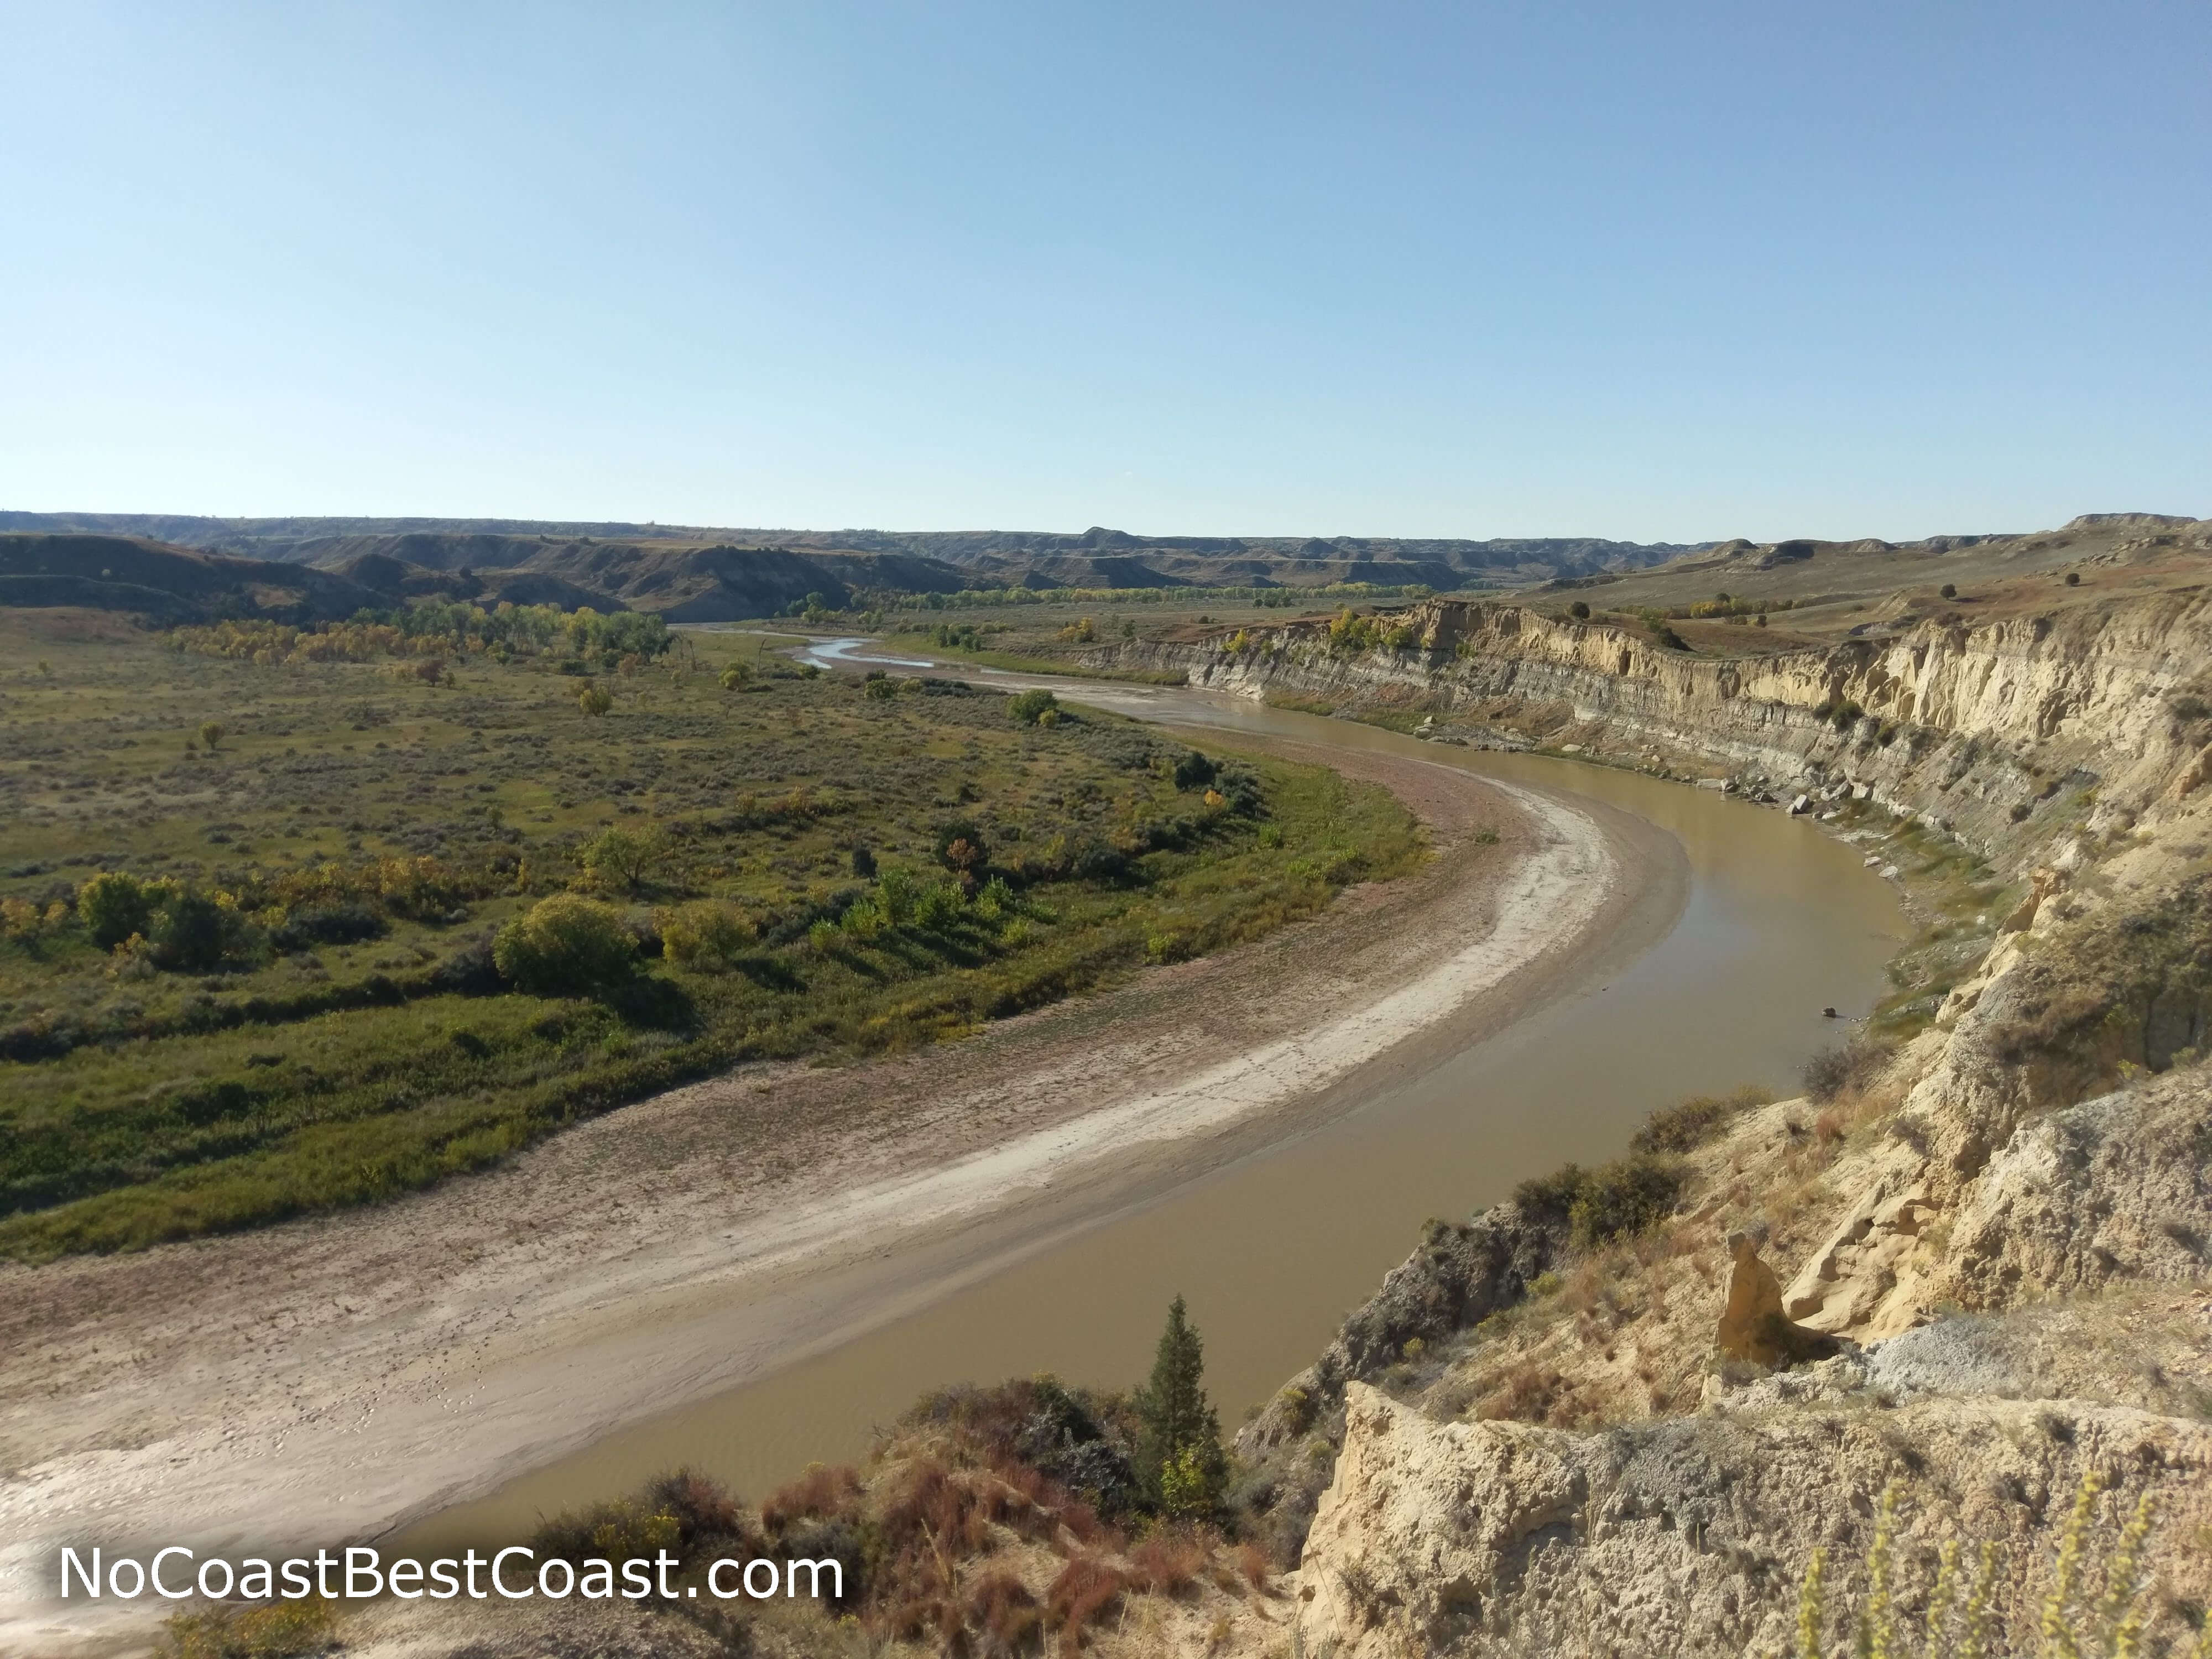 The Little Missouri River as seen looking west from the trail